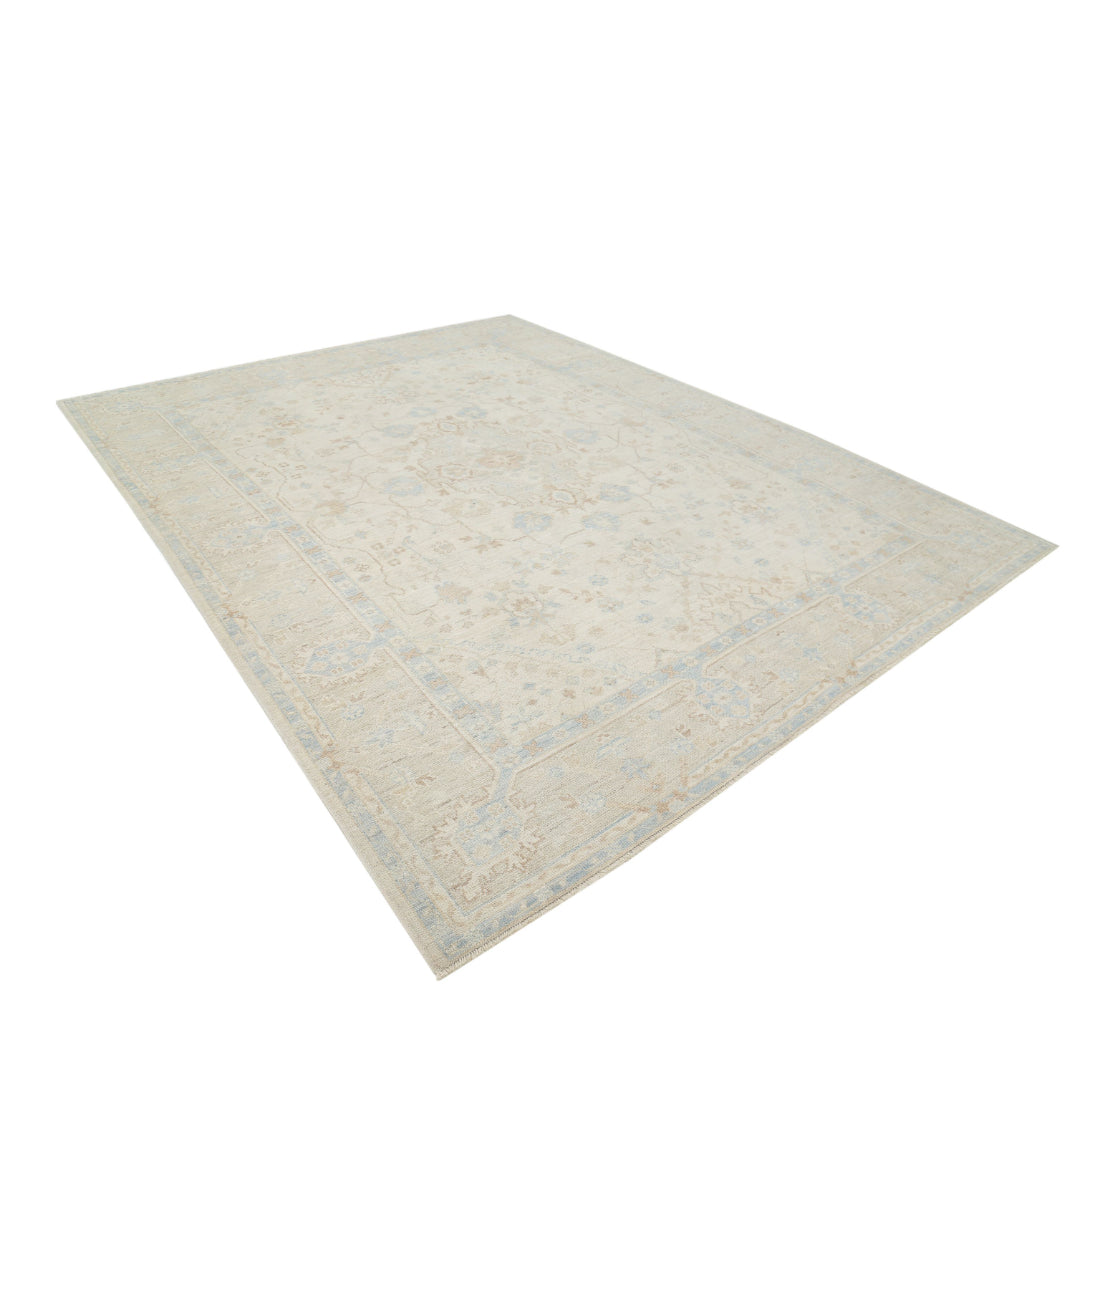 Hand Knotted Oushak Wool Rug - 9'4'' x 11'10'' 9'4'' x 11'10'' (280 X 355) / Ivory / Grey